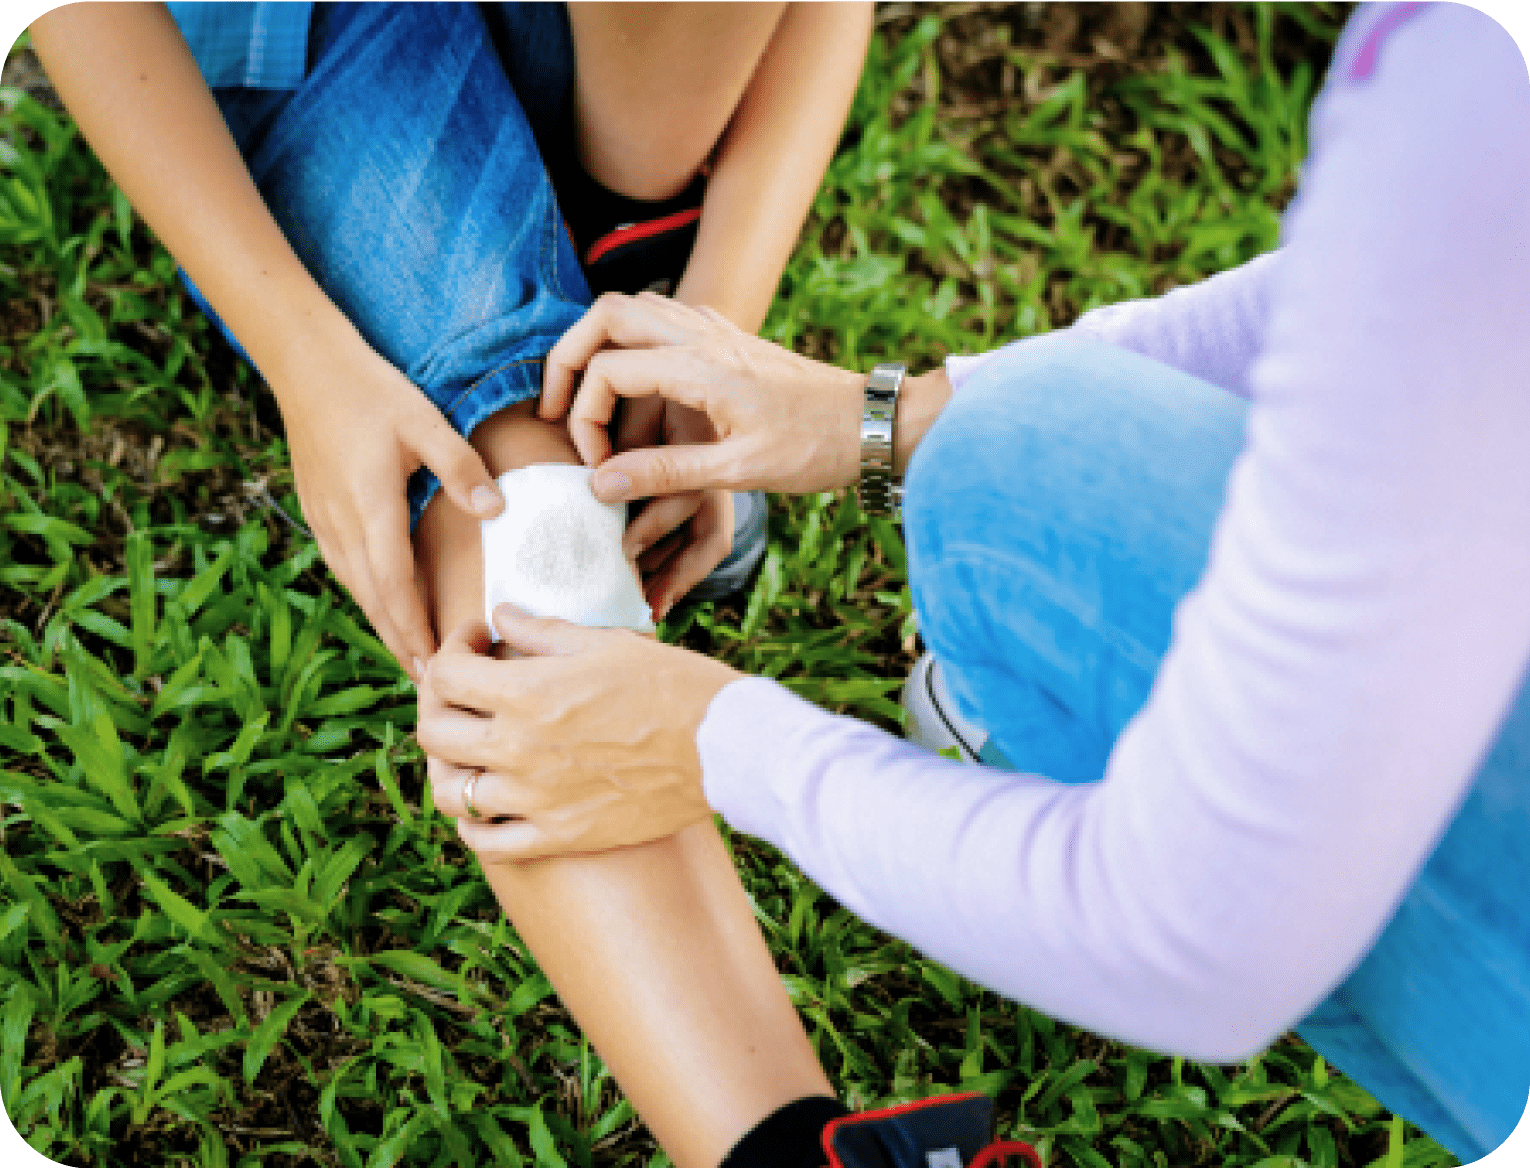 Adult placing adhesive bandage on child to protect a scraped knee.